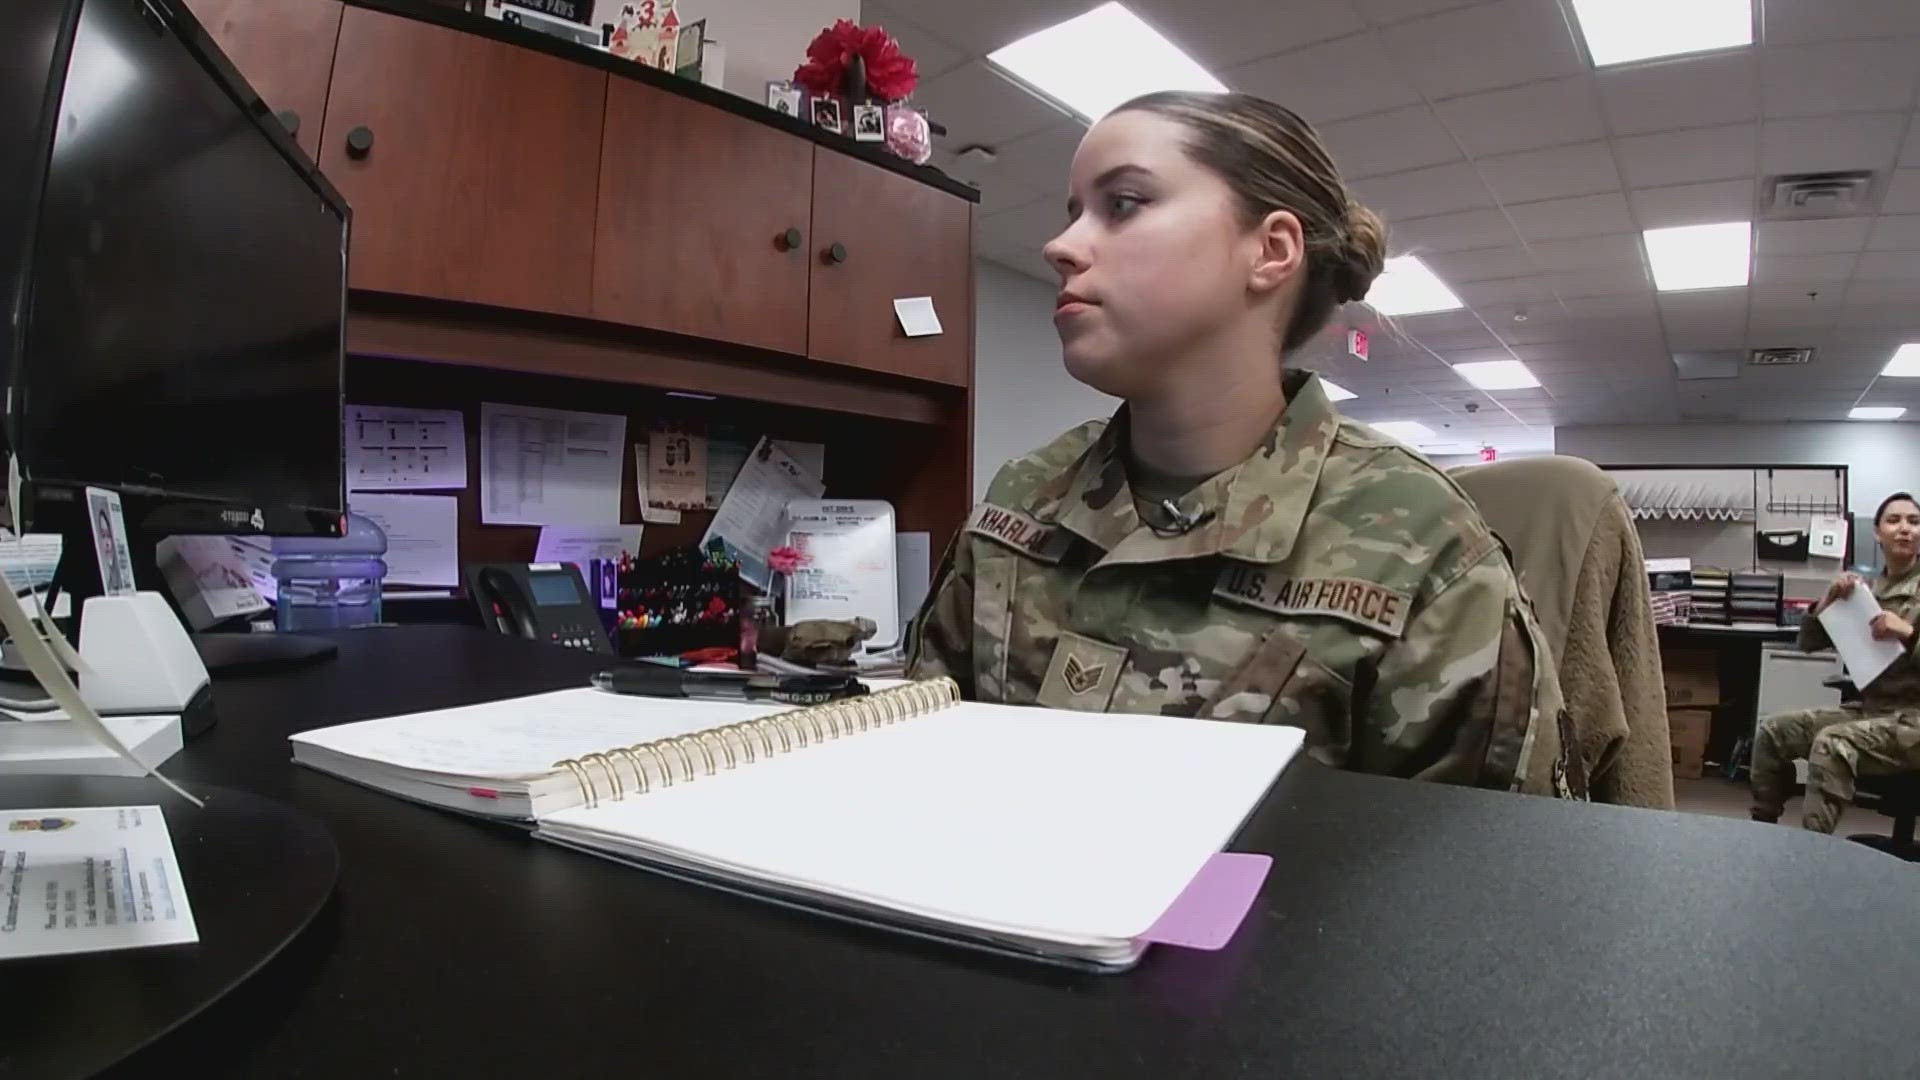 One staff Sergeant who serves at the Goldwater Air National Guard Base works with veterans and active duty members on a daily basis. 12News honors her service.